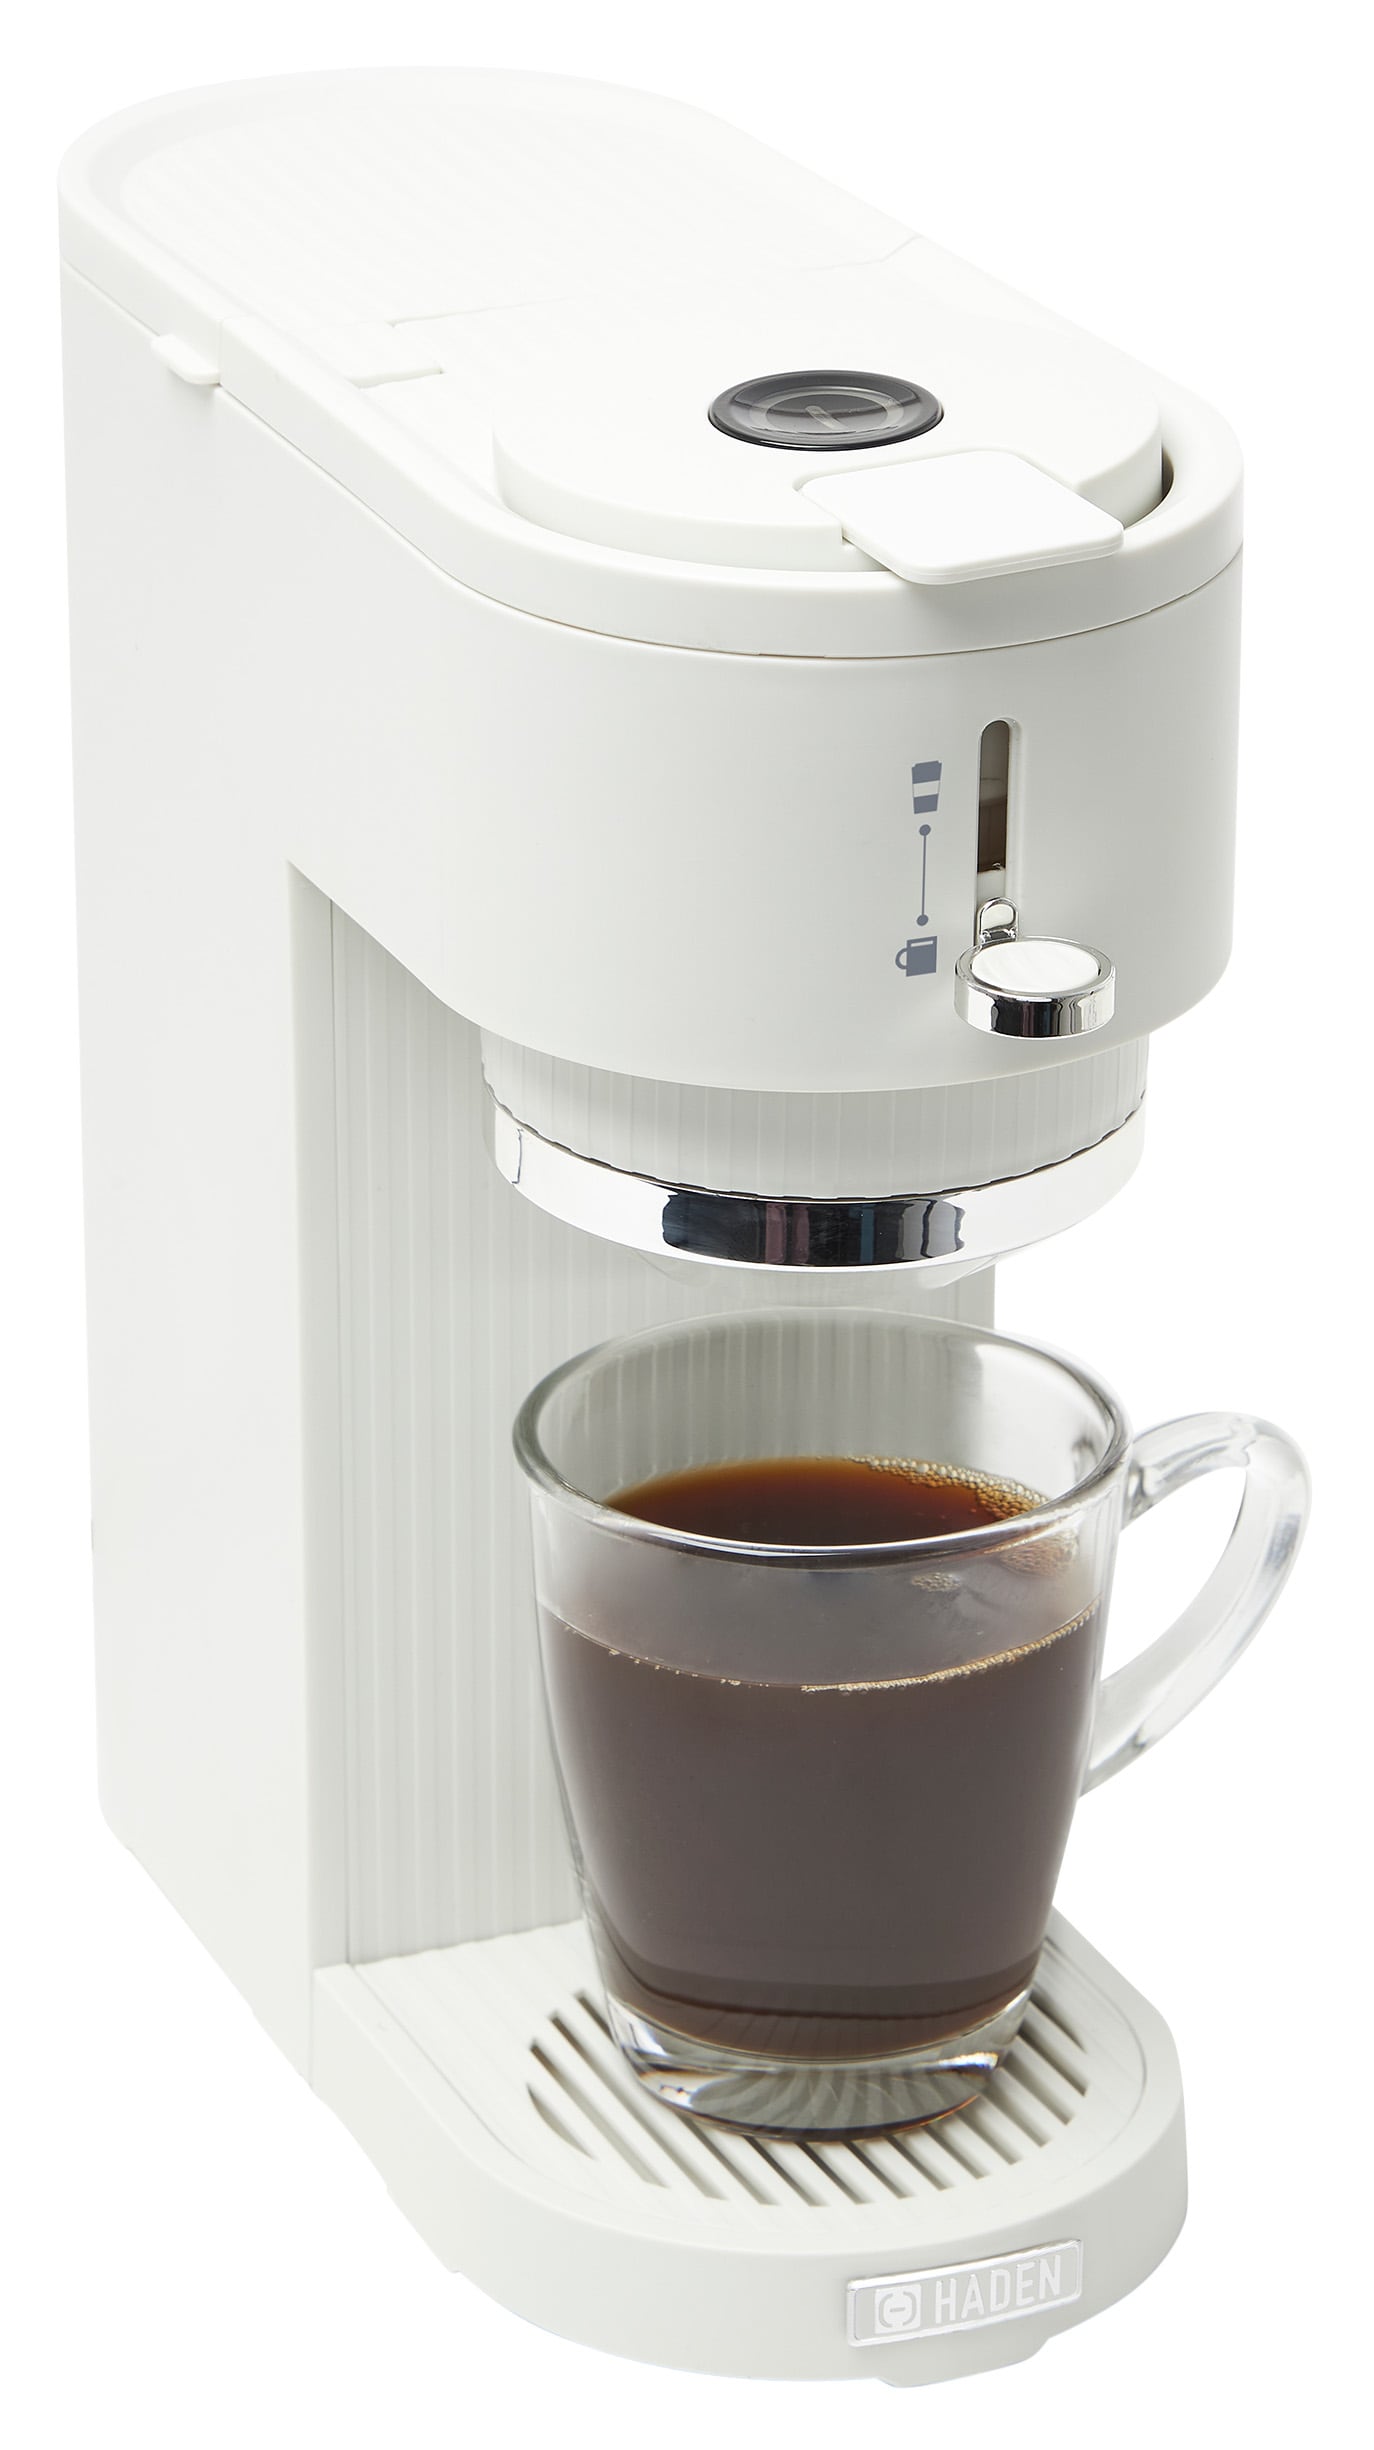 Russell Hobbs Colors Plus Cream - Drip Coffee Maker - 1.25l Glass Jug,  Brews up to 15 Cups, Digital Control and LCD Display, Programmable Timer,  Hot